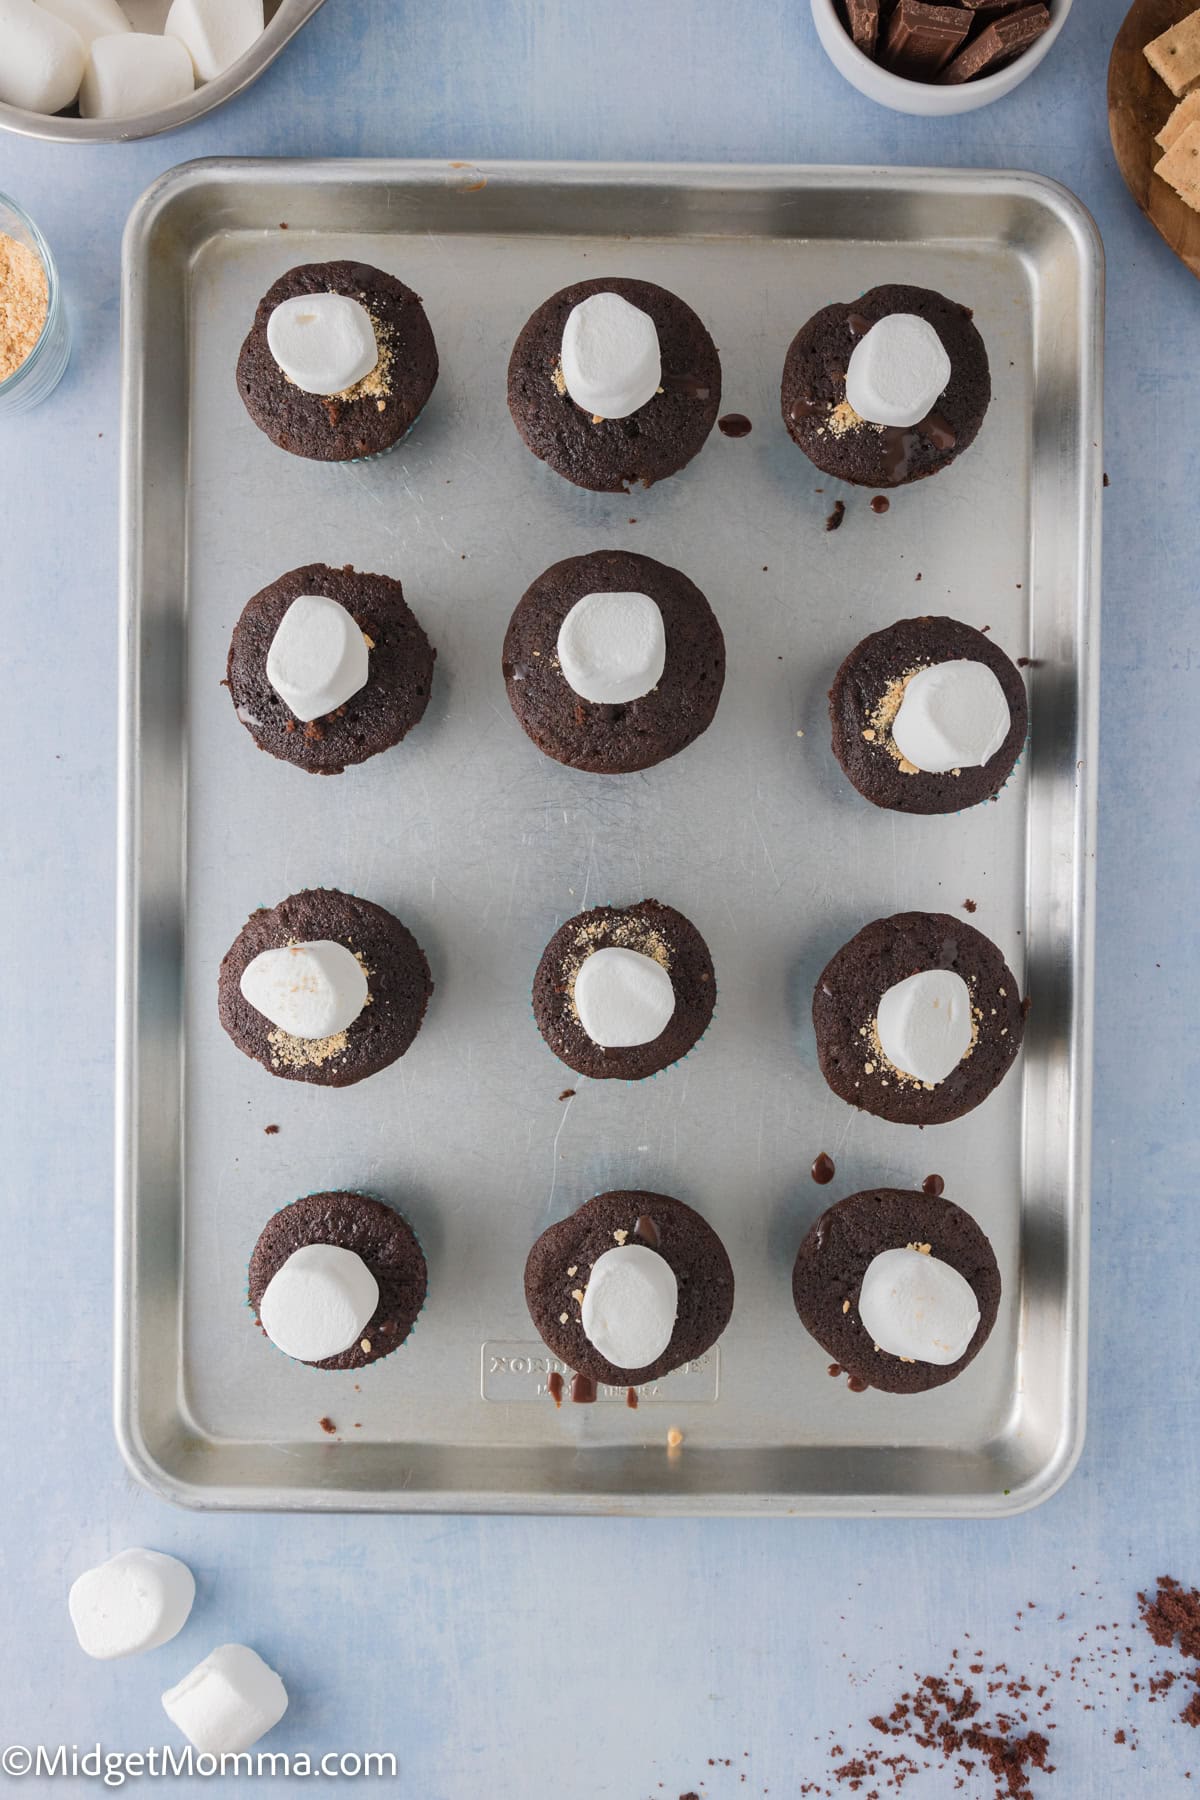 A baking tray with twelve freshly baked chocolate cupcakes, each topped with a marshmallow, viewed from above.